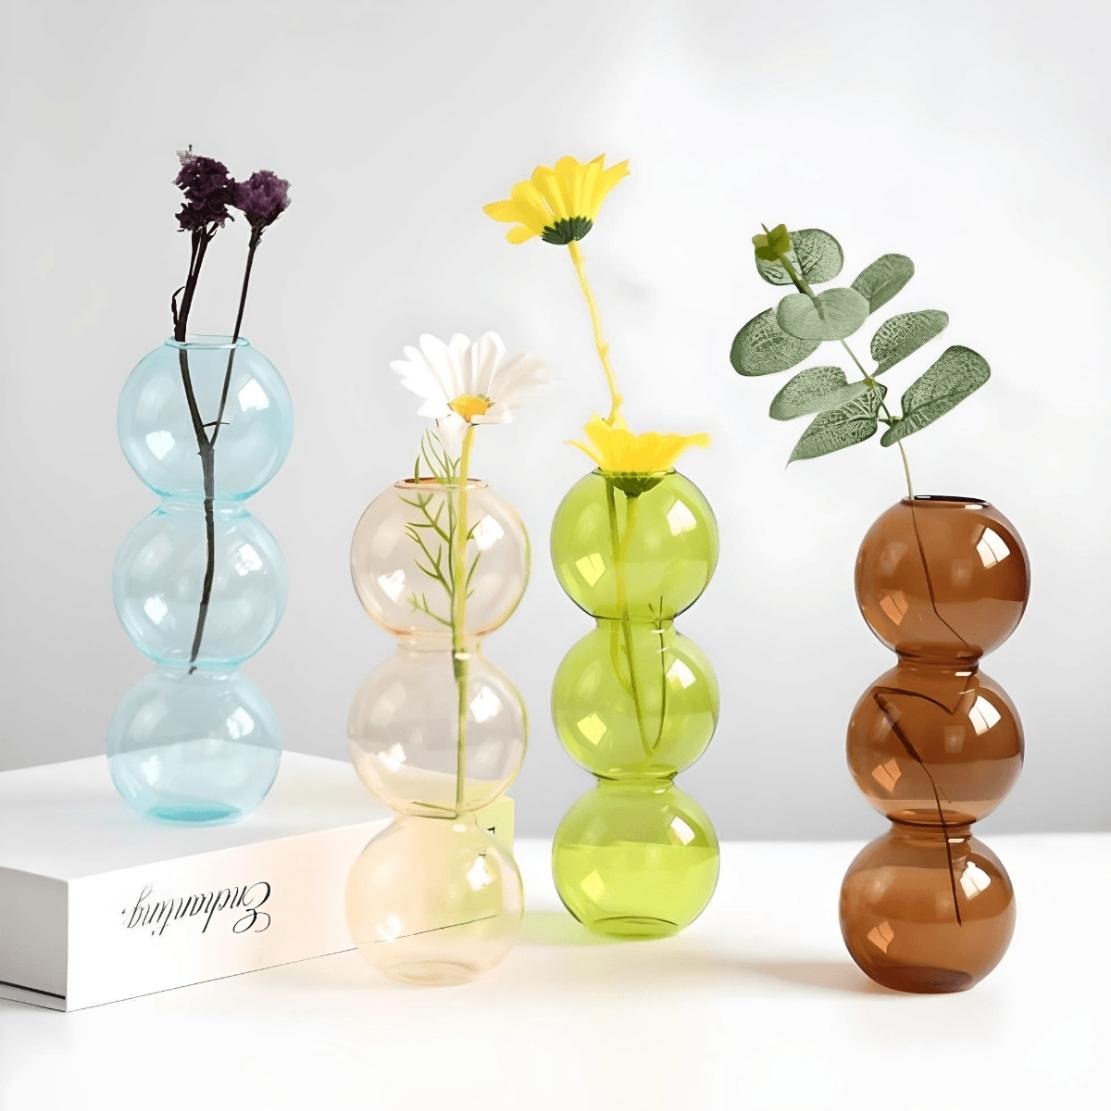 Blue, yellow, green & brown layered glass ball vases